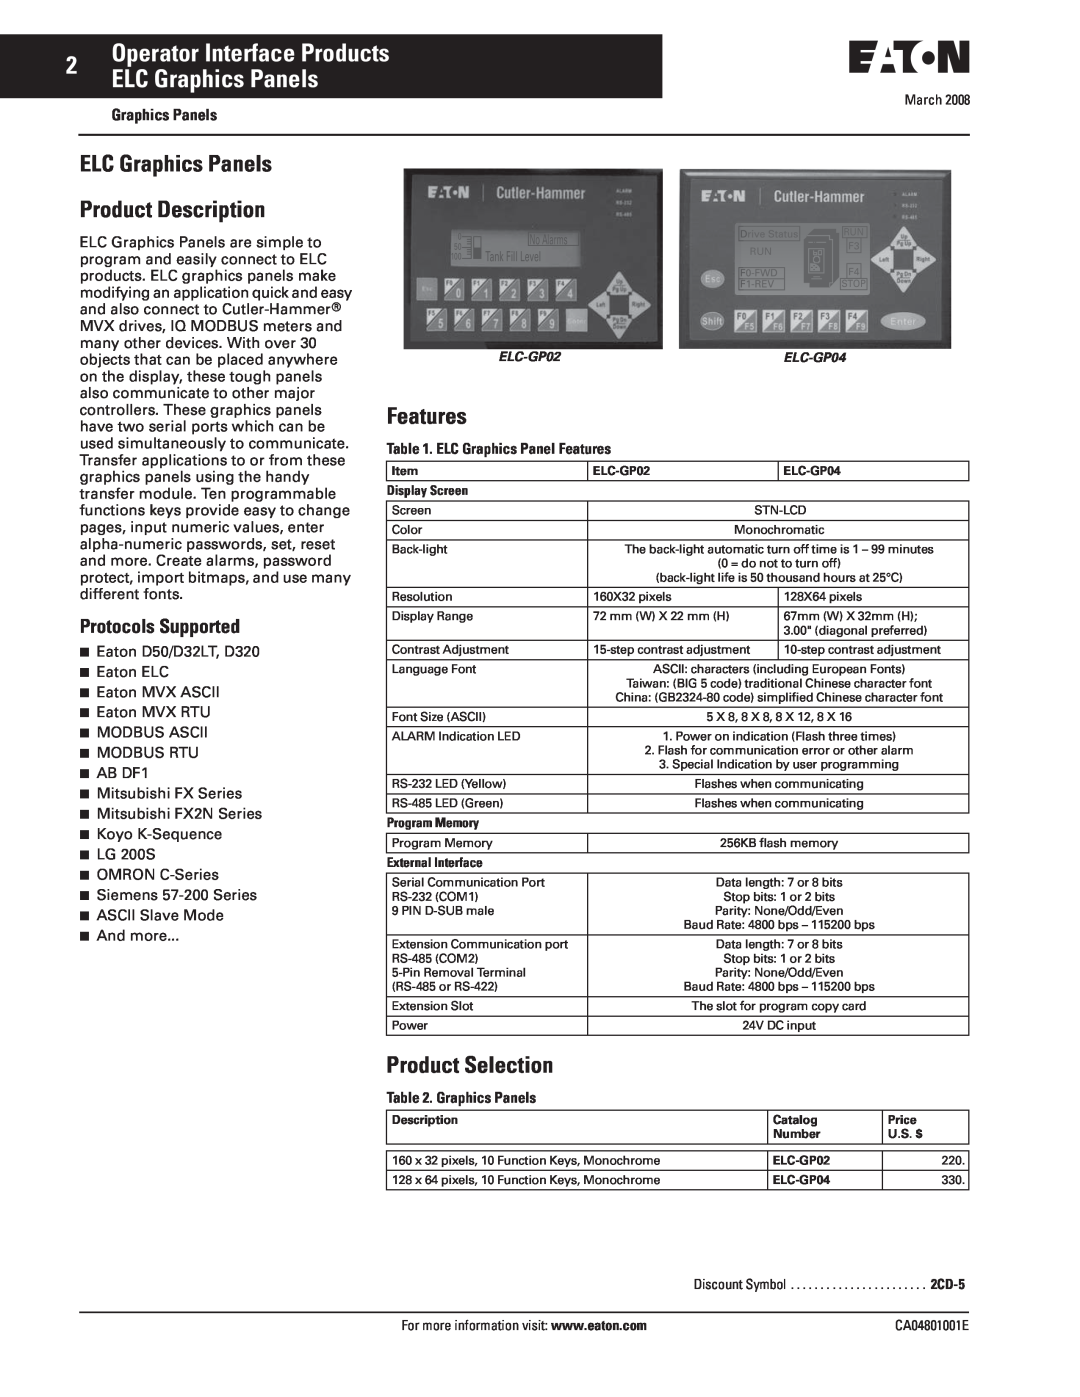 Eaton Electrical CA04801001E ELC Graphics Panels Product Description, Features, Product Selection, Protocols Supported 